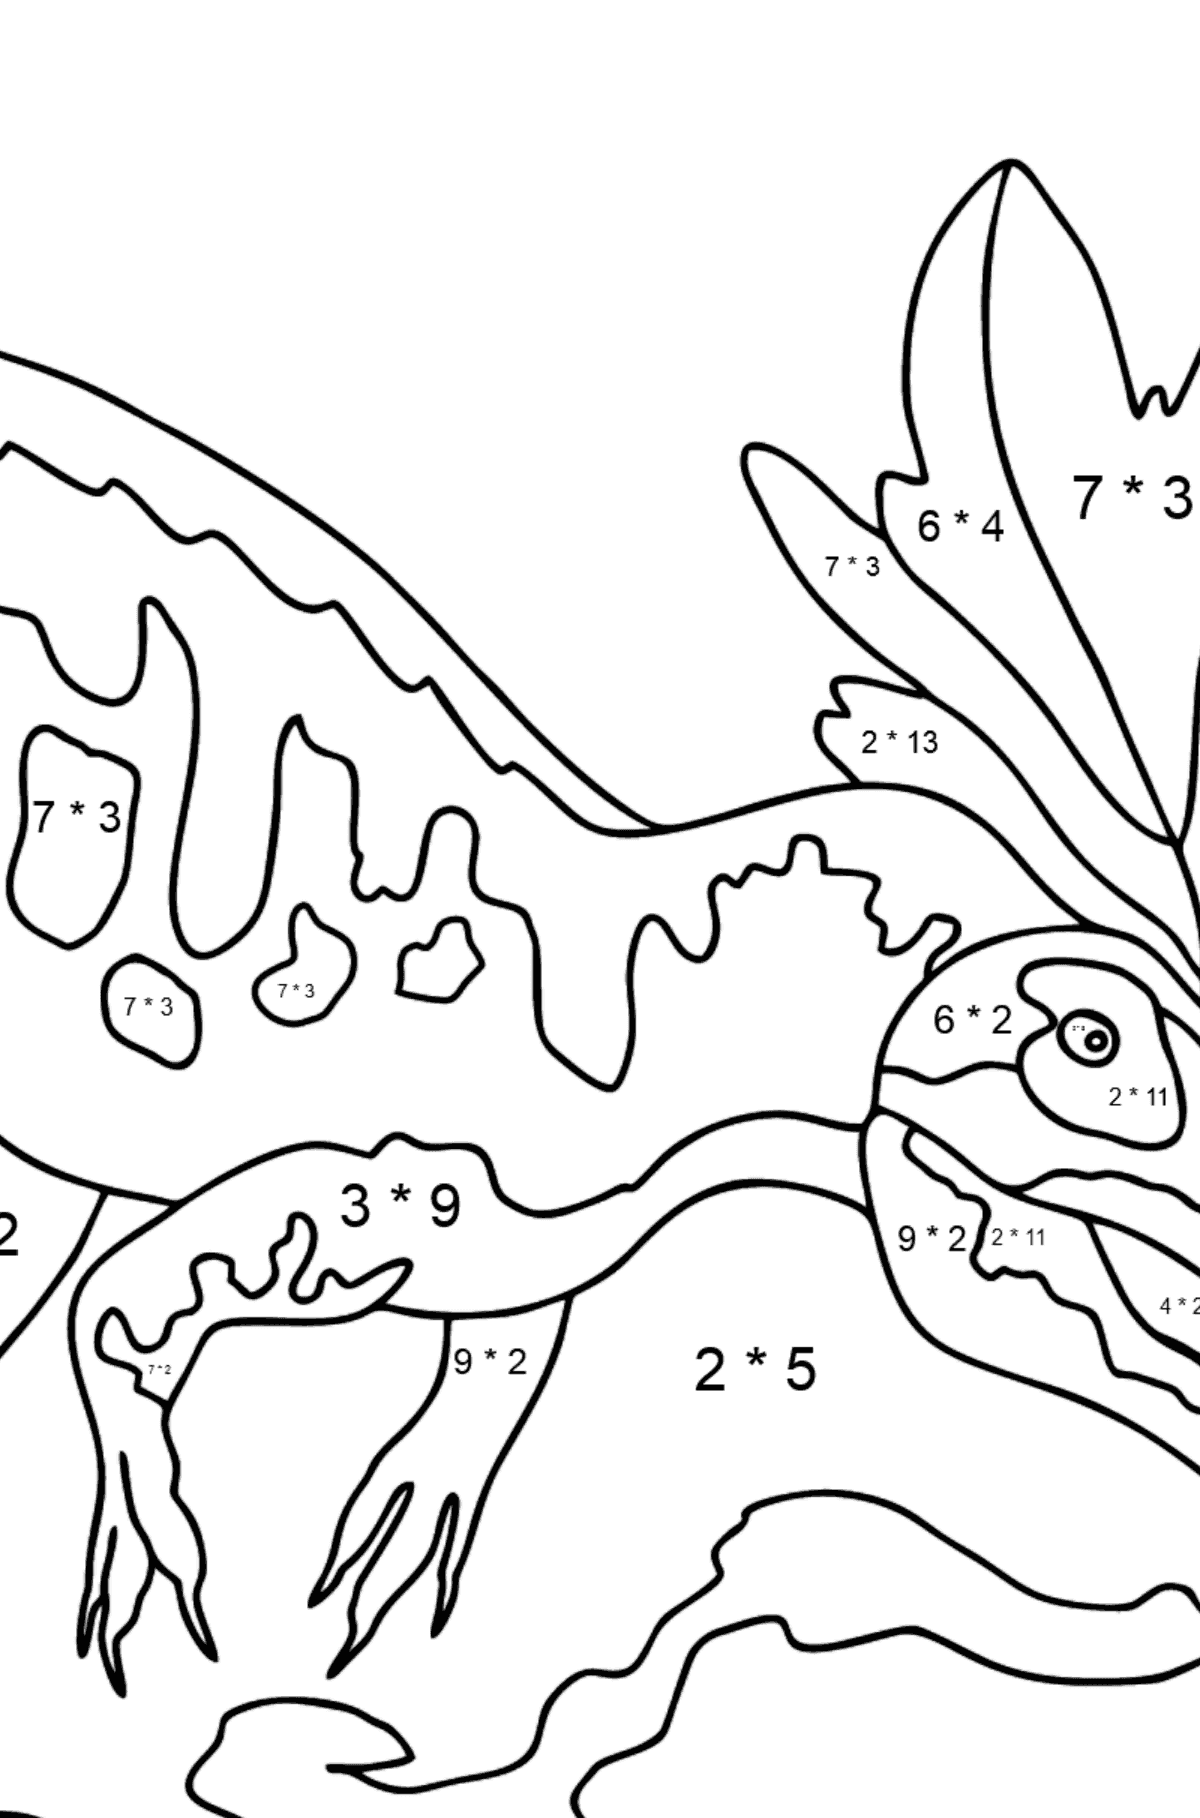 Coloring Page - Allosaurus - A Well-Researched Dinosaur - Math Coloring - Multiplication for Kids